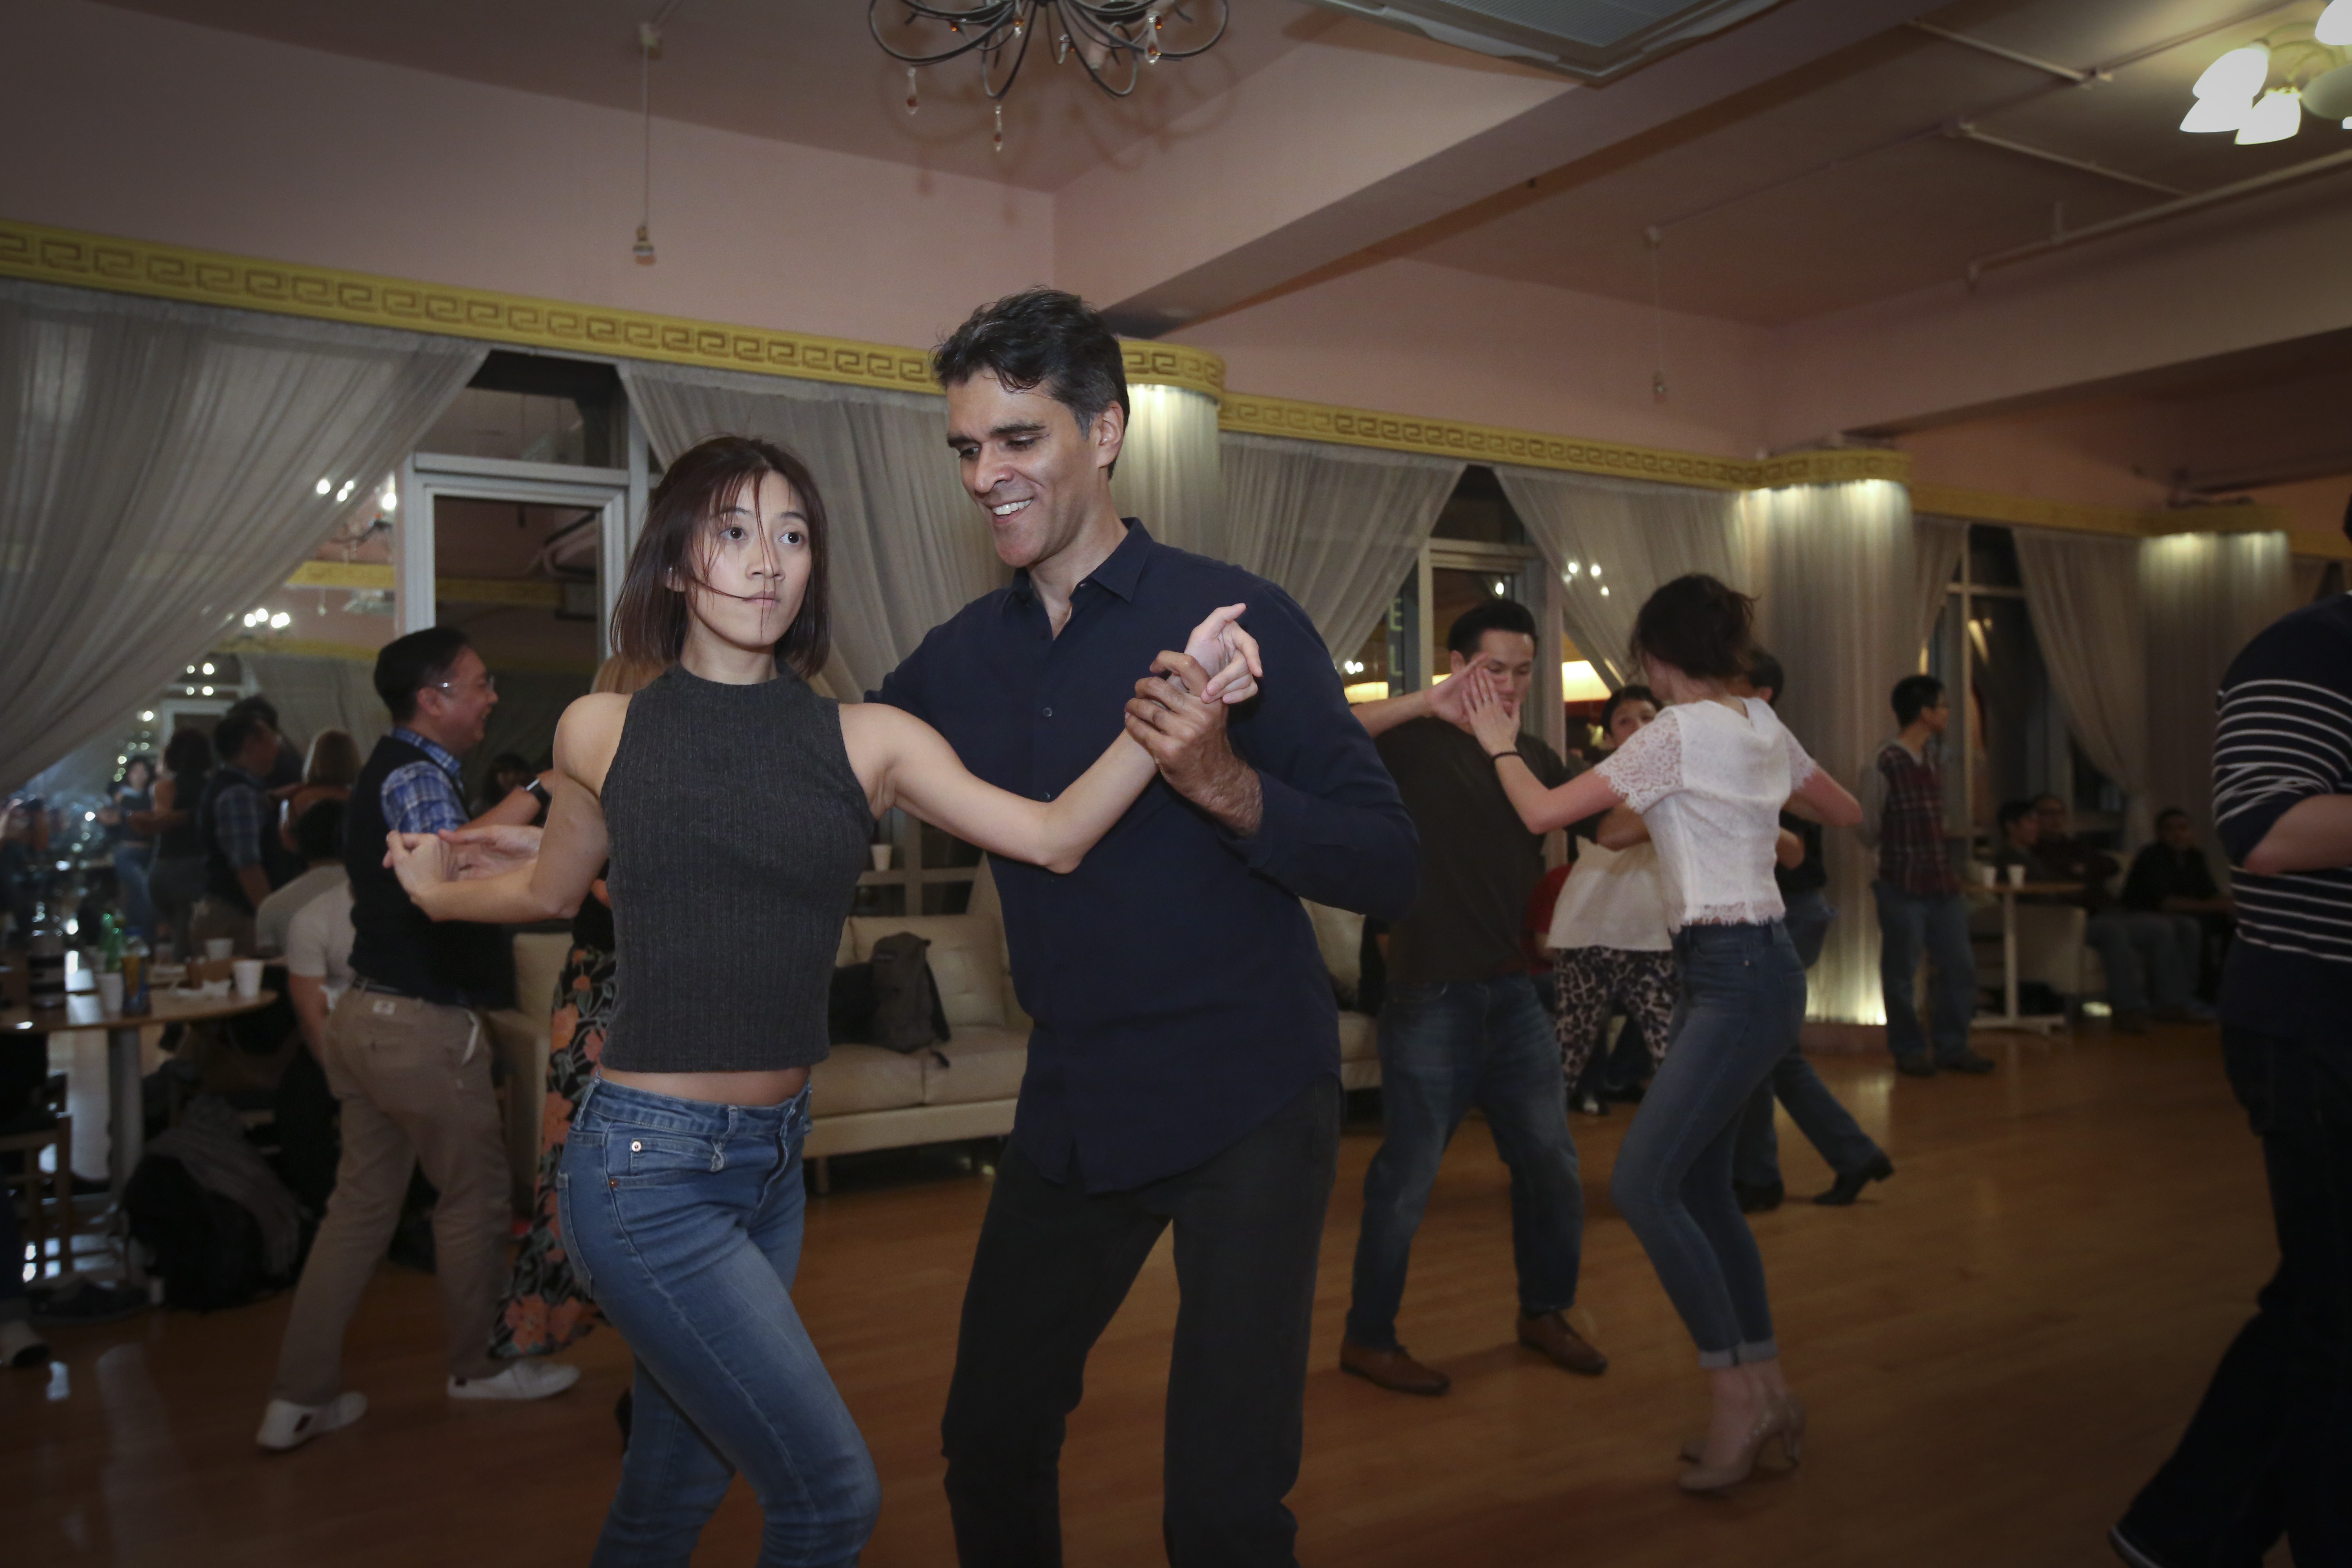 Dance teachers Sherman Mosquito (left) and Ricci Yasin (right) at a salsa dance party in Causeway Bay. Photo: Edmond So